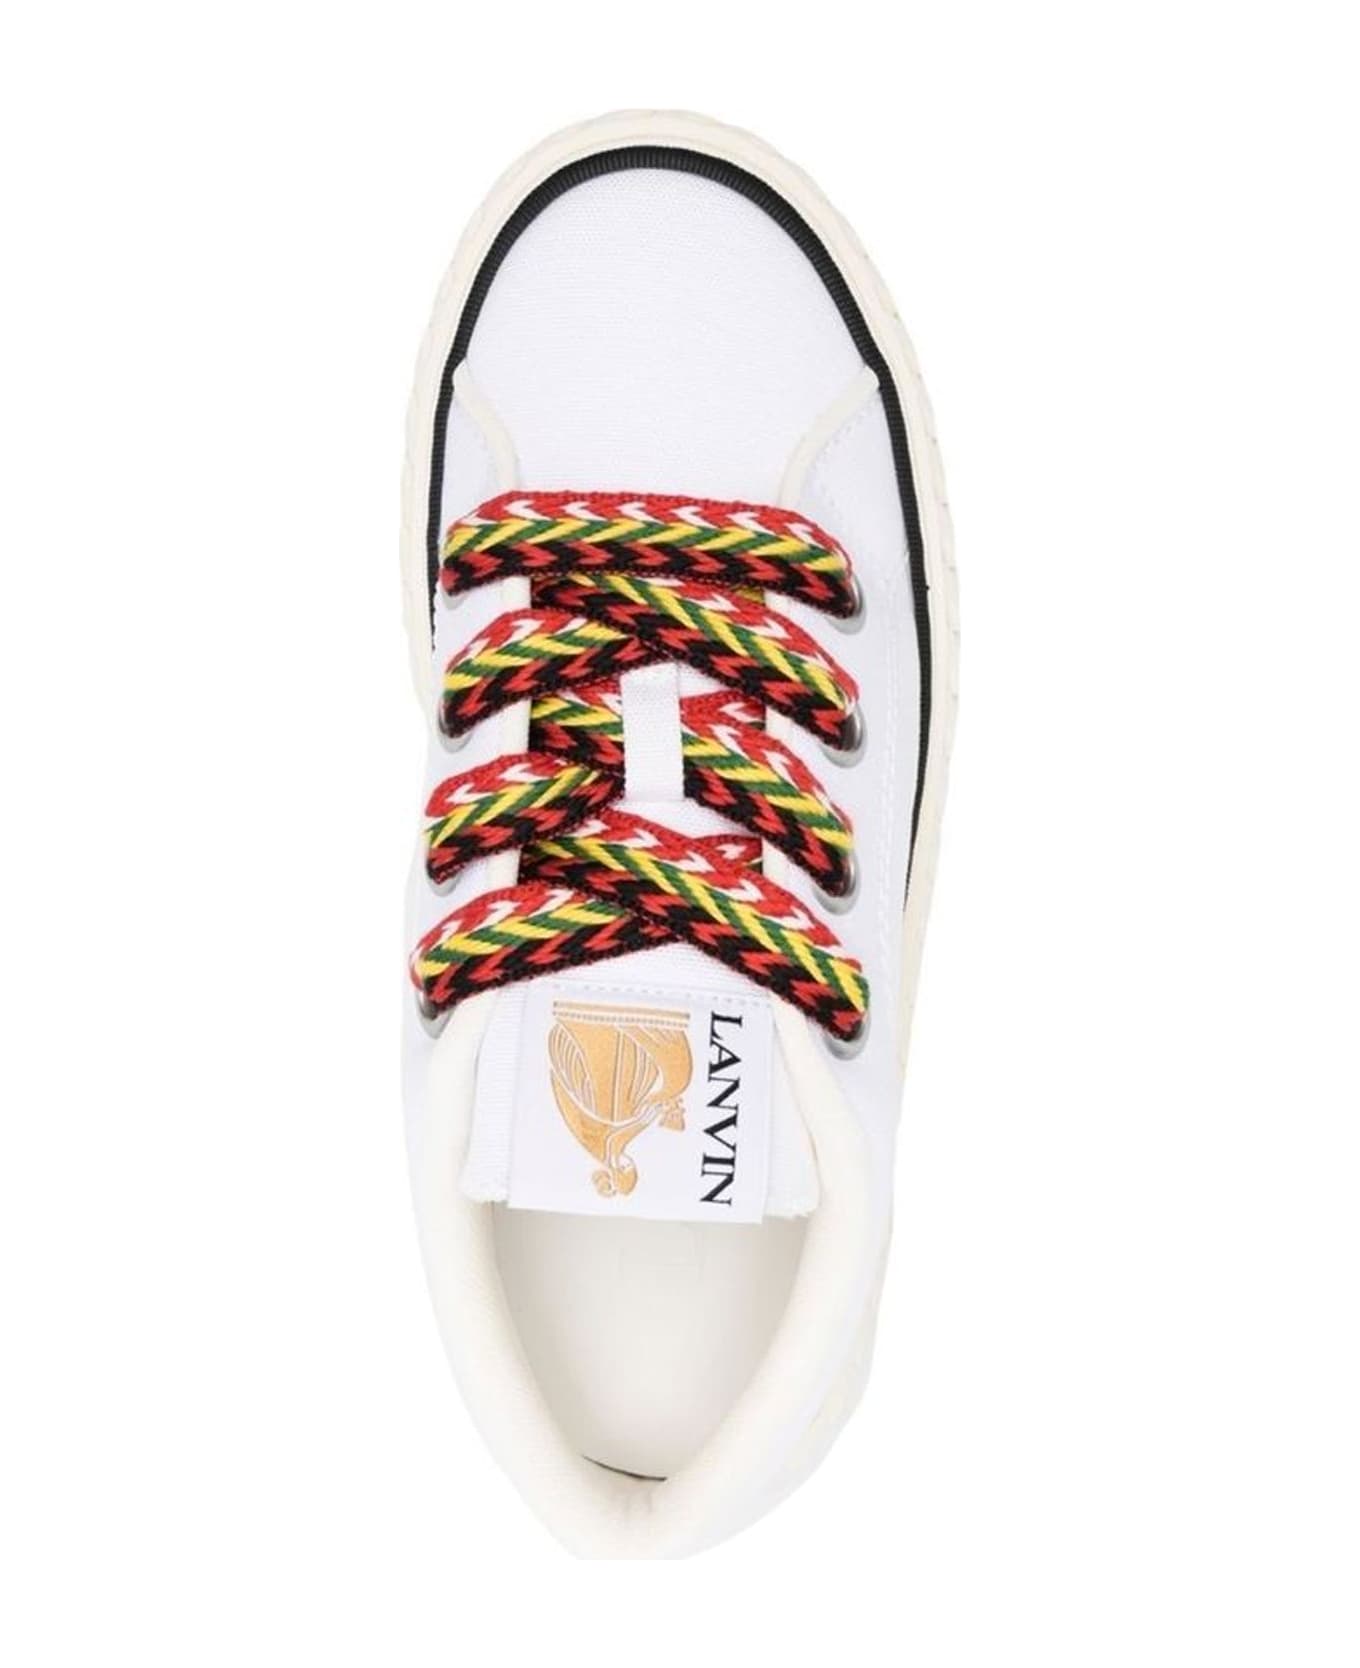 Lanvin Cotton Lace-up Sneakers - White ウェッジシューズ